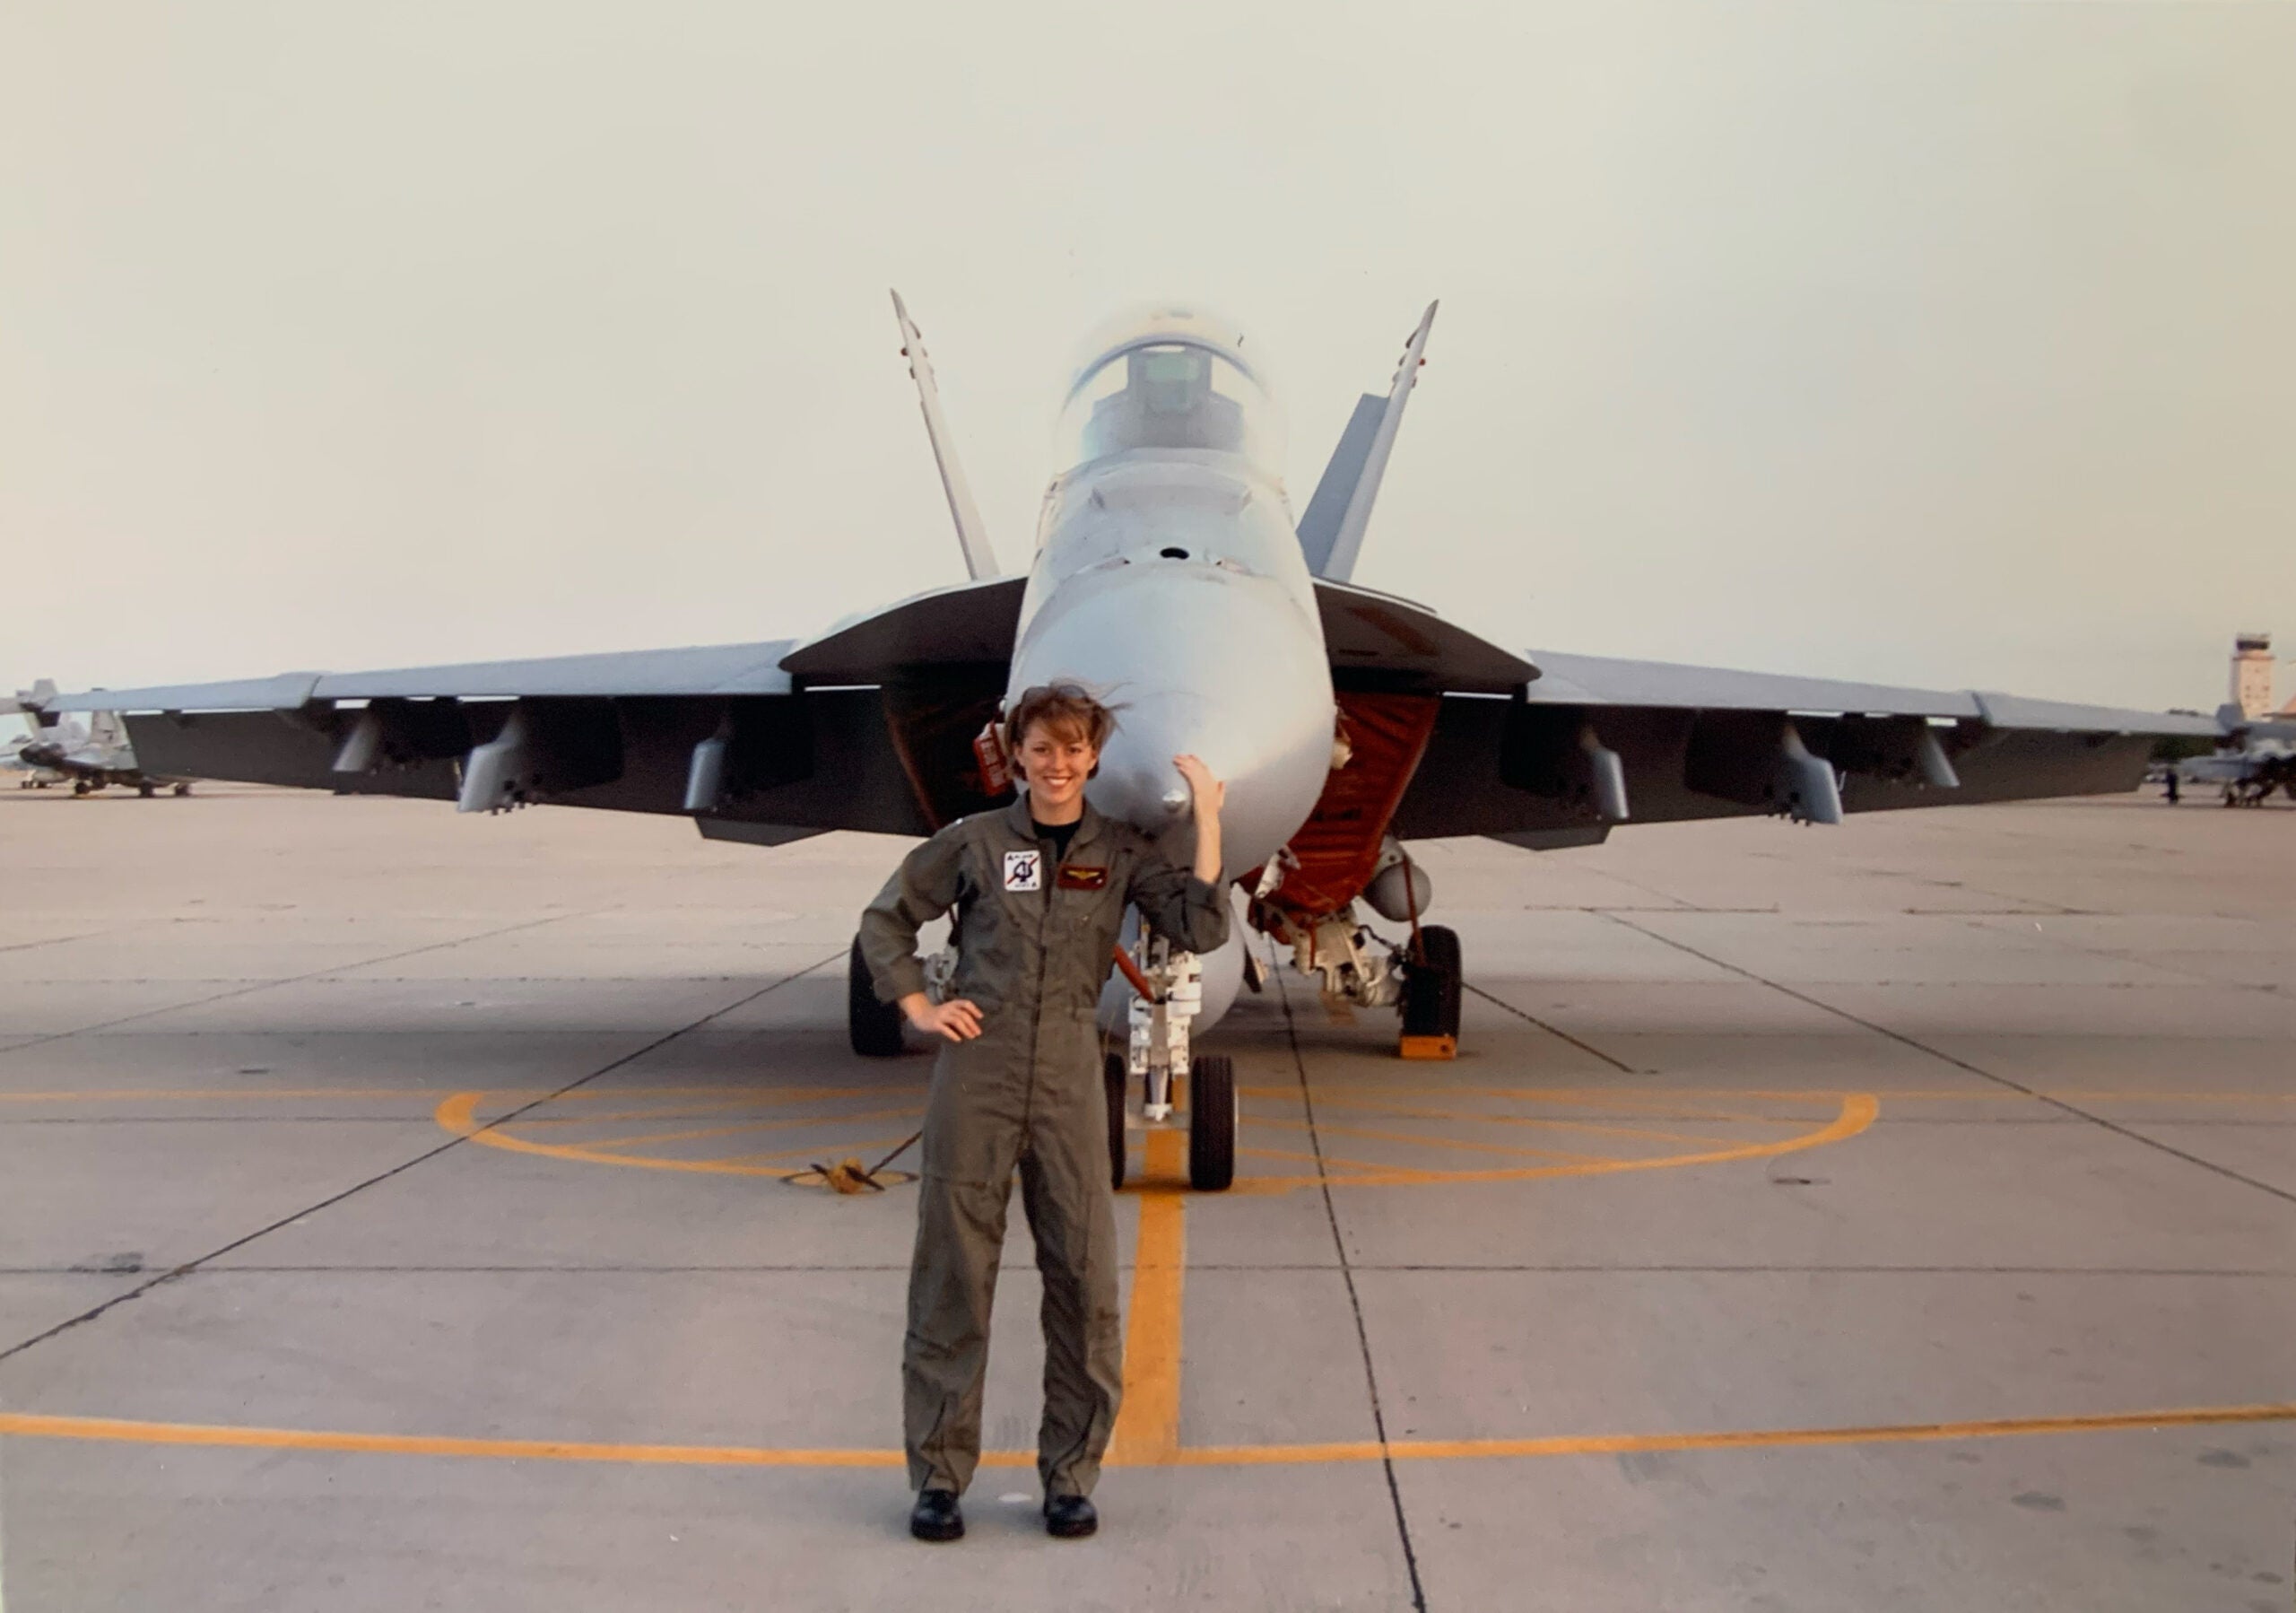 what it’s like inside a f/a-18 cockpit, according to a fighter pilot